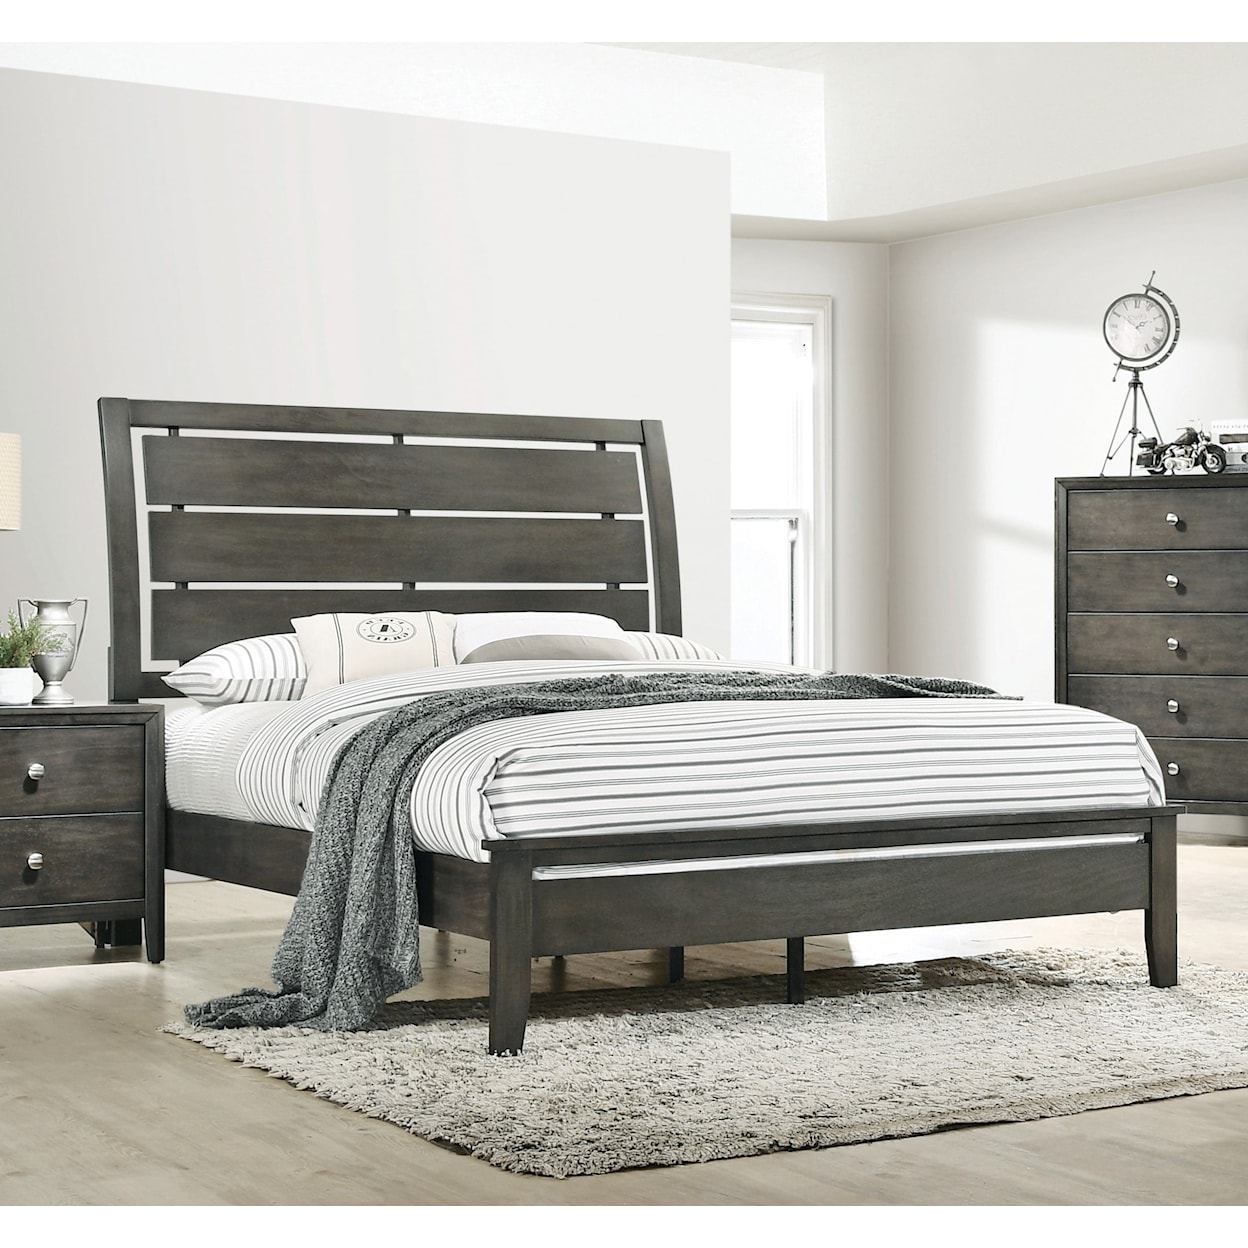 Lifestyle C1060A Full Bed